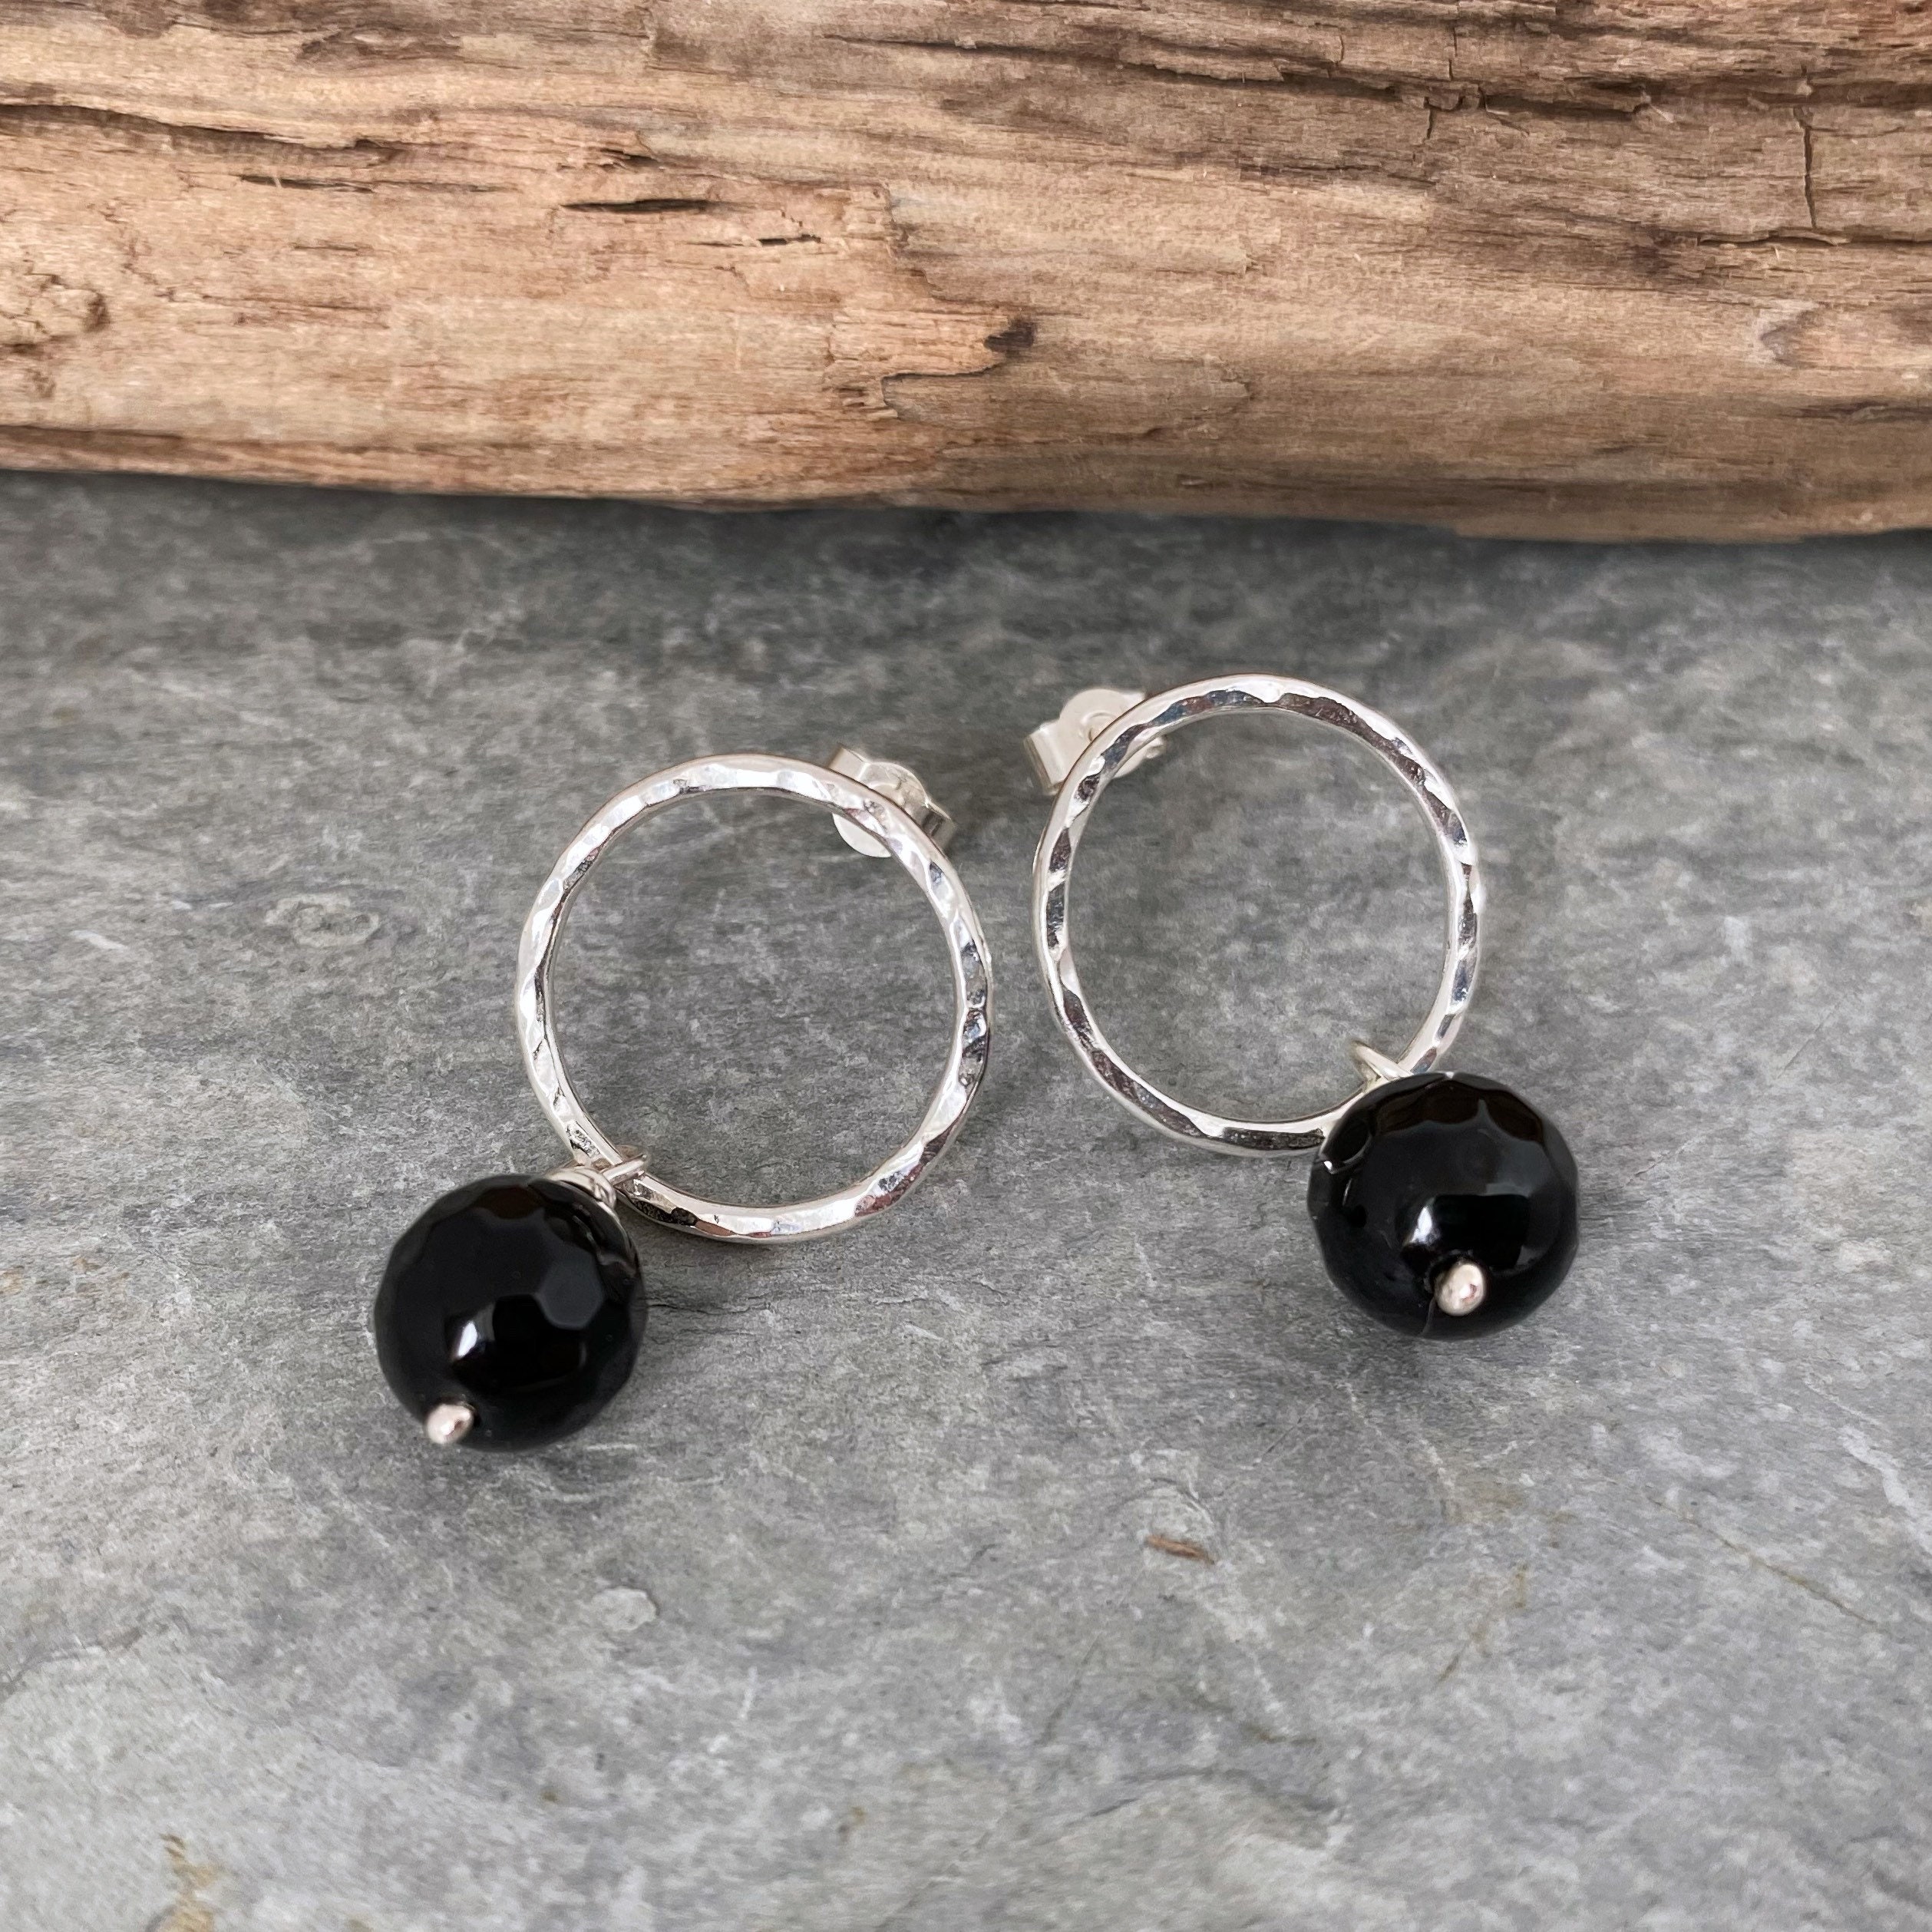 Silver Circle Stud Earrings With Black Onyx Beads. Hammered Silver Round Earrings, Small Hoop Black